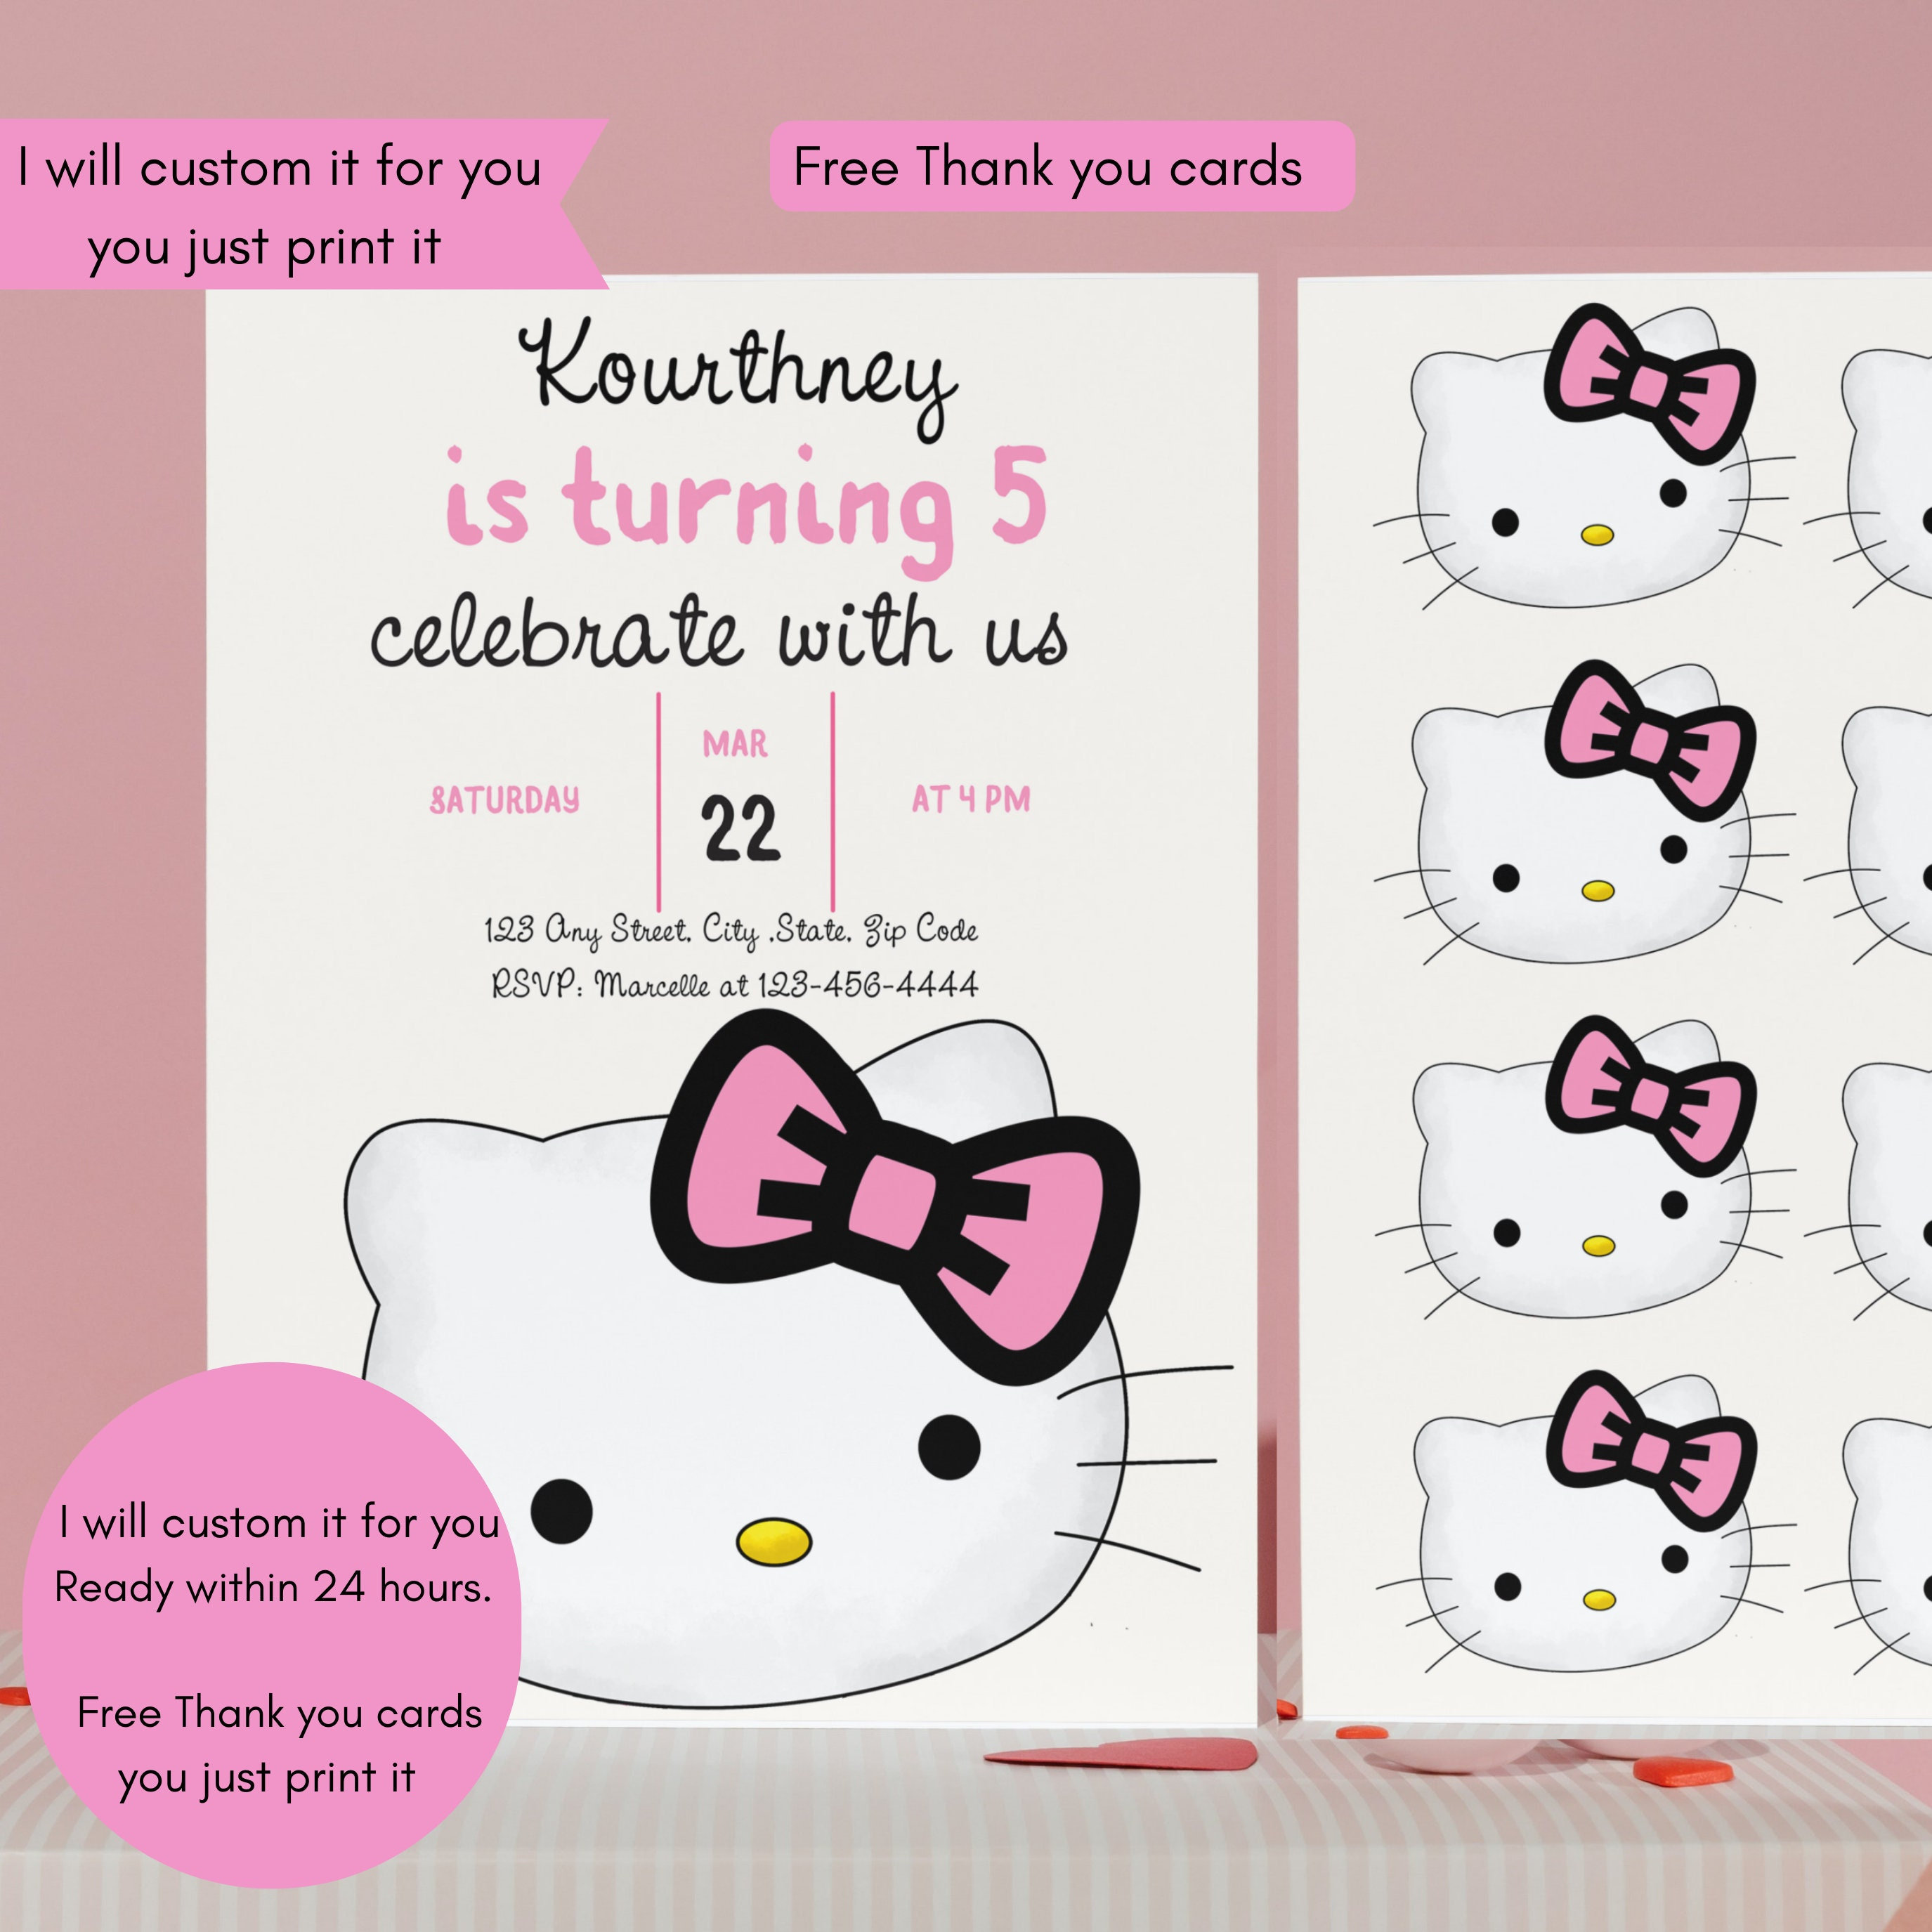 Time for a puzzle party with Hello Kitty Friends' sixth anniversary